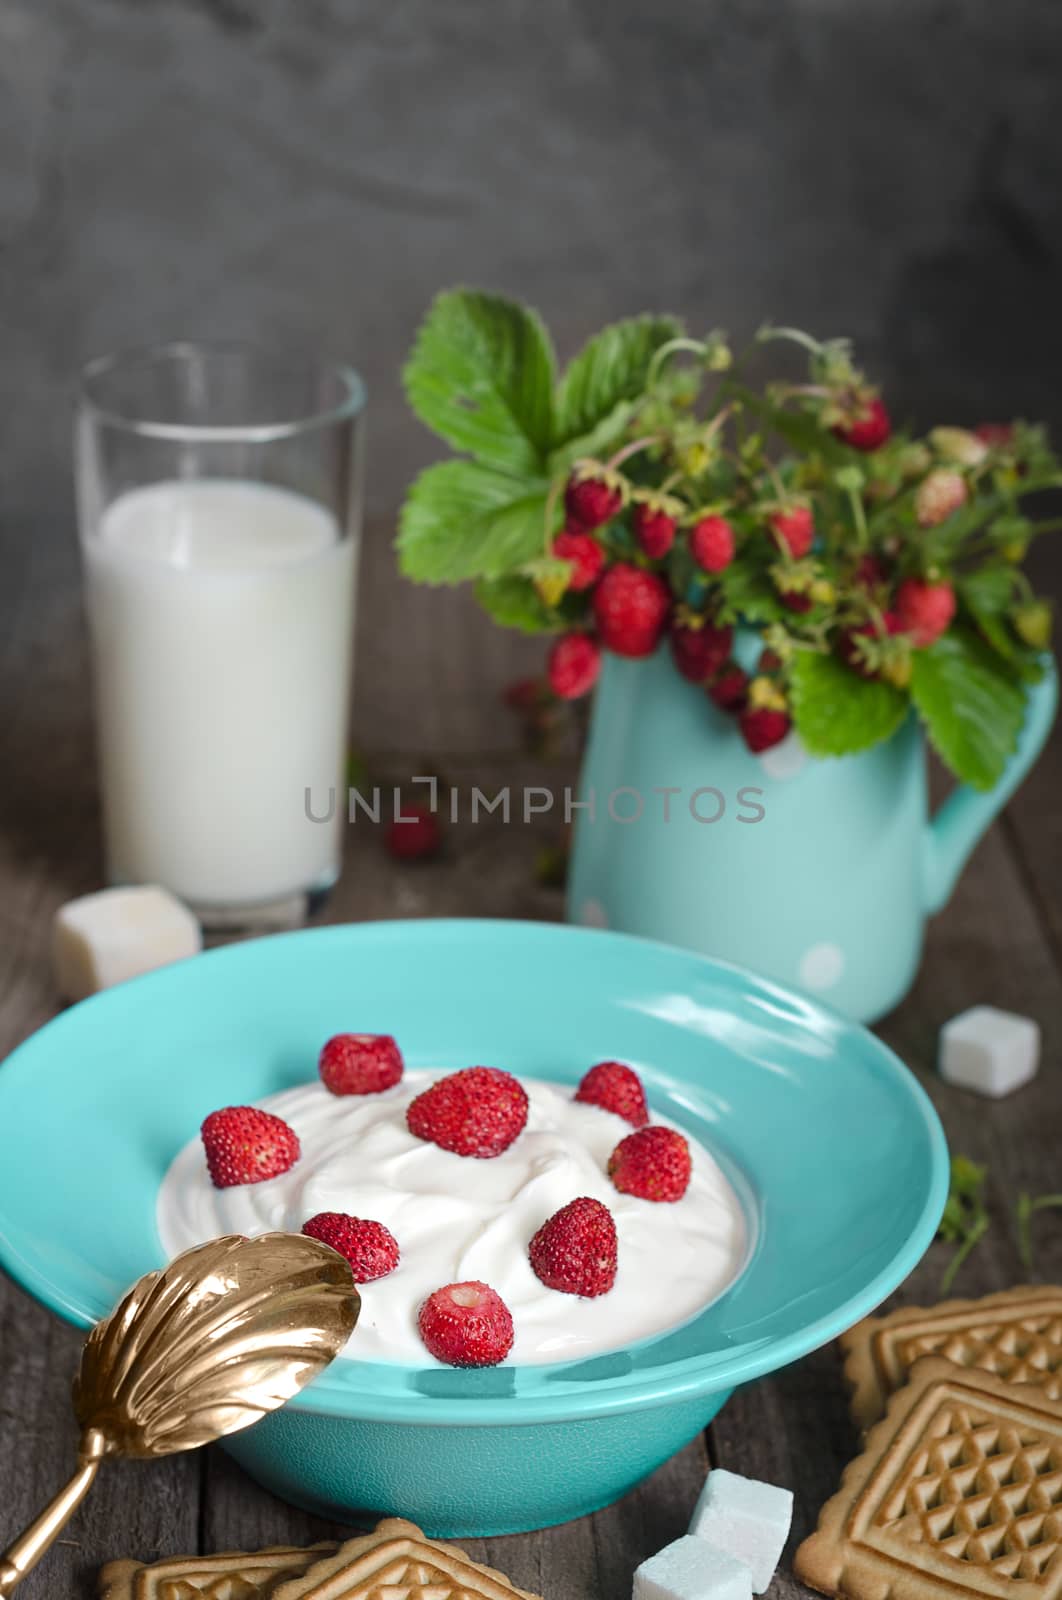 Strawberry with cream in a ceramic Cup, cookies and milk in glass on old wooden surface. Bouquet with strawberries in a ceramic vase and antique spoon In a rustic style.